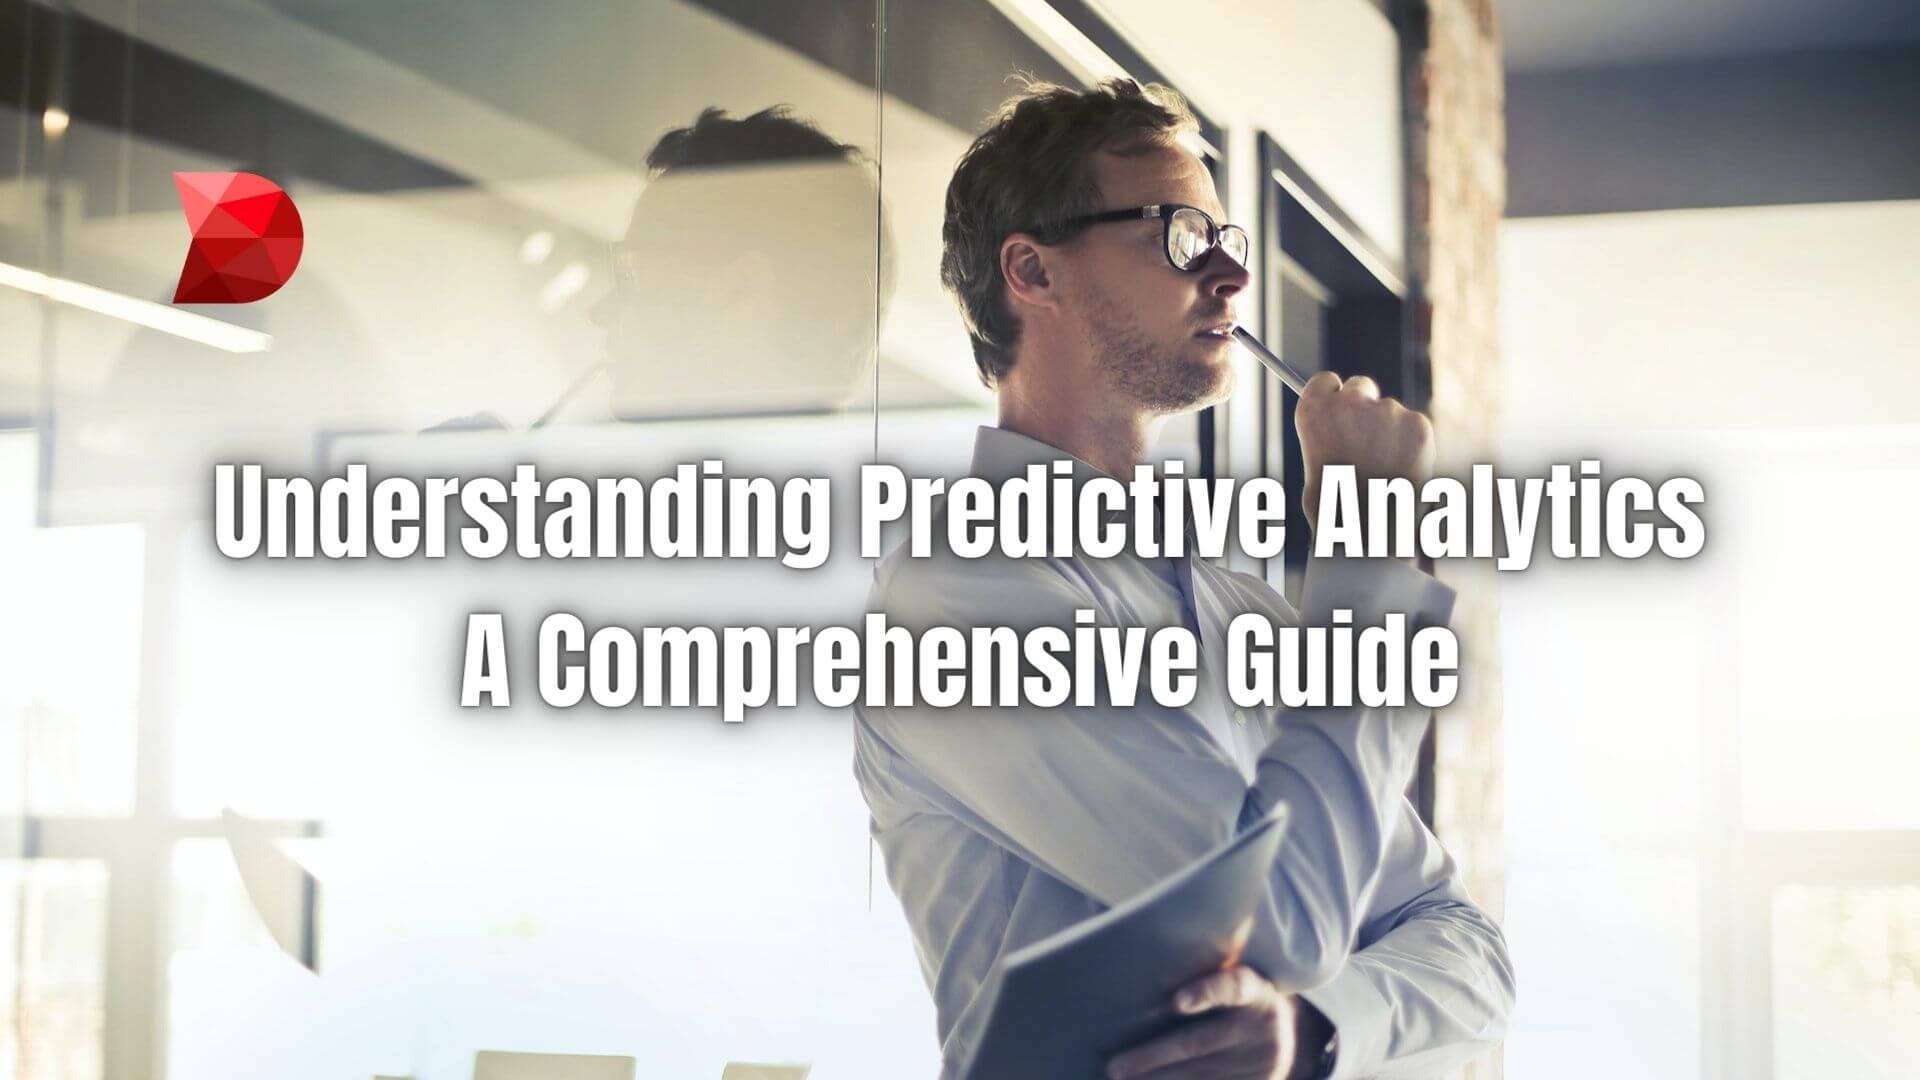 To get the most out of predictive analytics for risk management, it's vital to understand what predictive analytics is all about. Learn more!